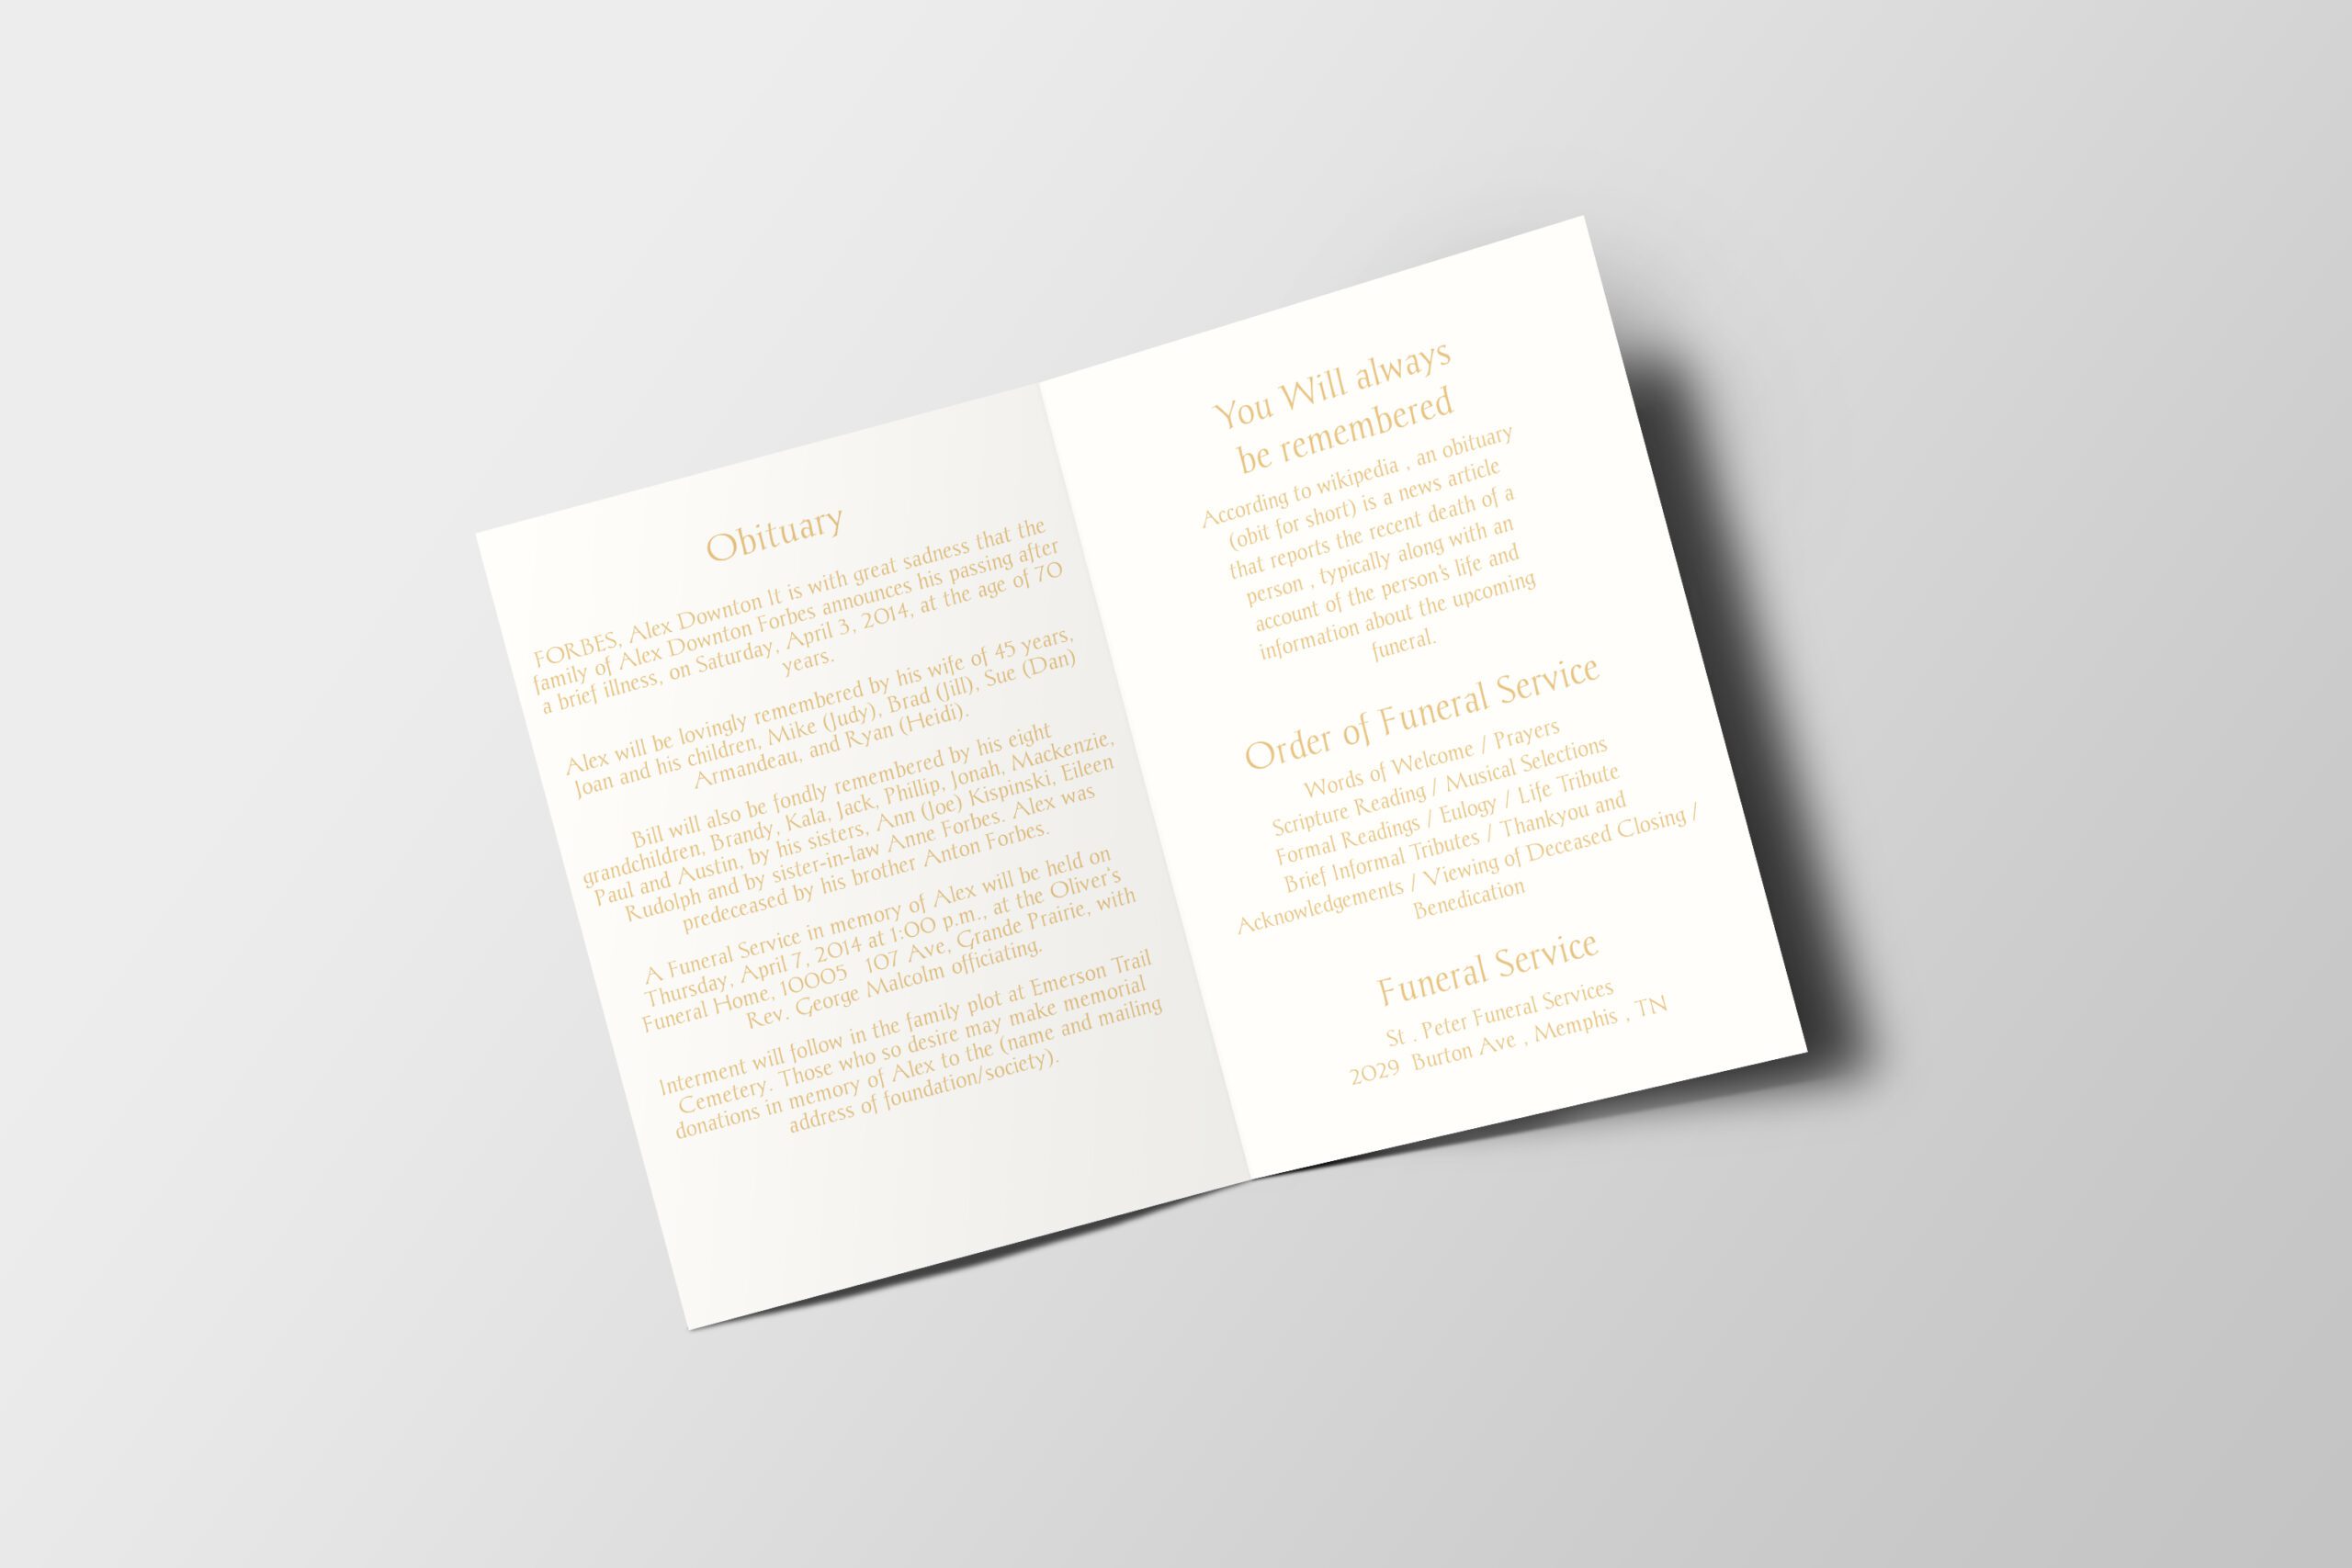 Monochromatic Beige Death Announcement Funeral Program Template inner page